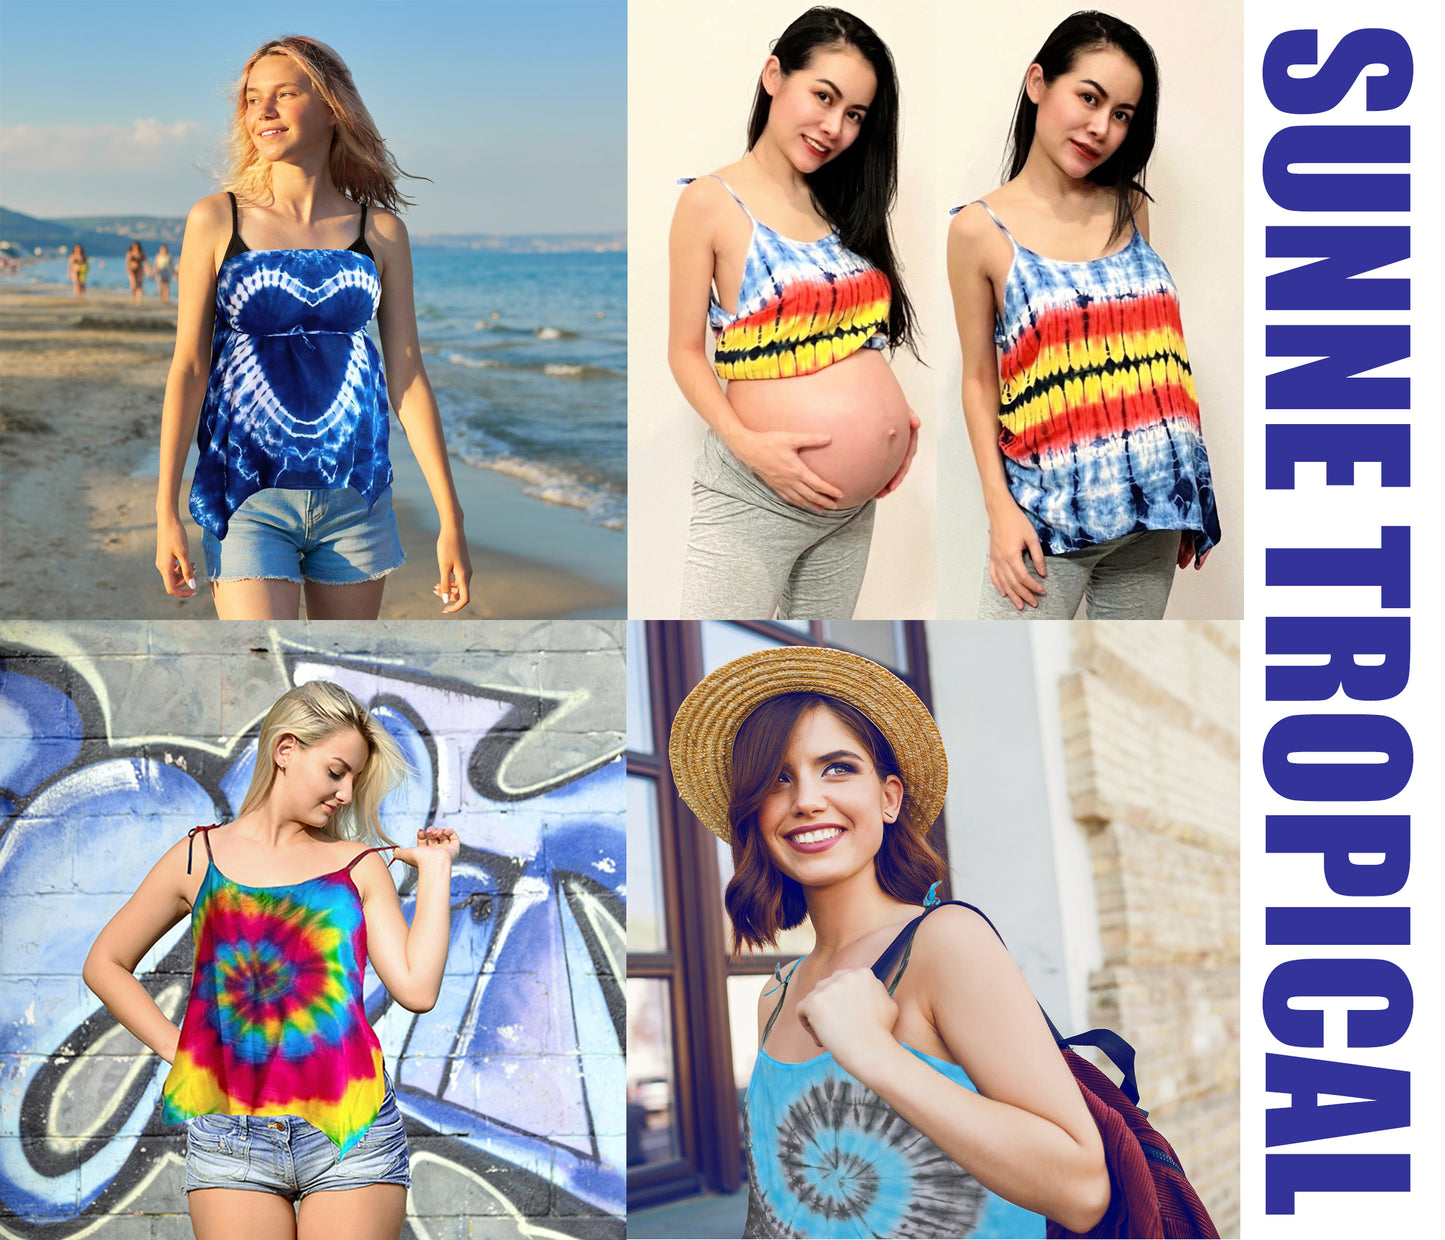 Cami Camisole Teen & Women, One Size Free Size Fit 0 to 8, Handmade Tie Dyed - Blue Seashell